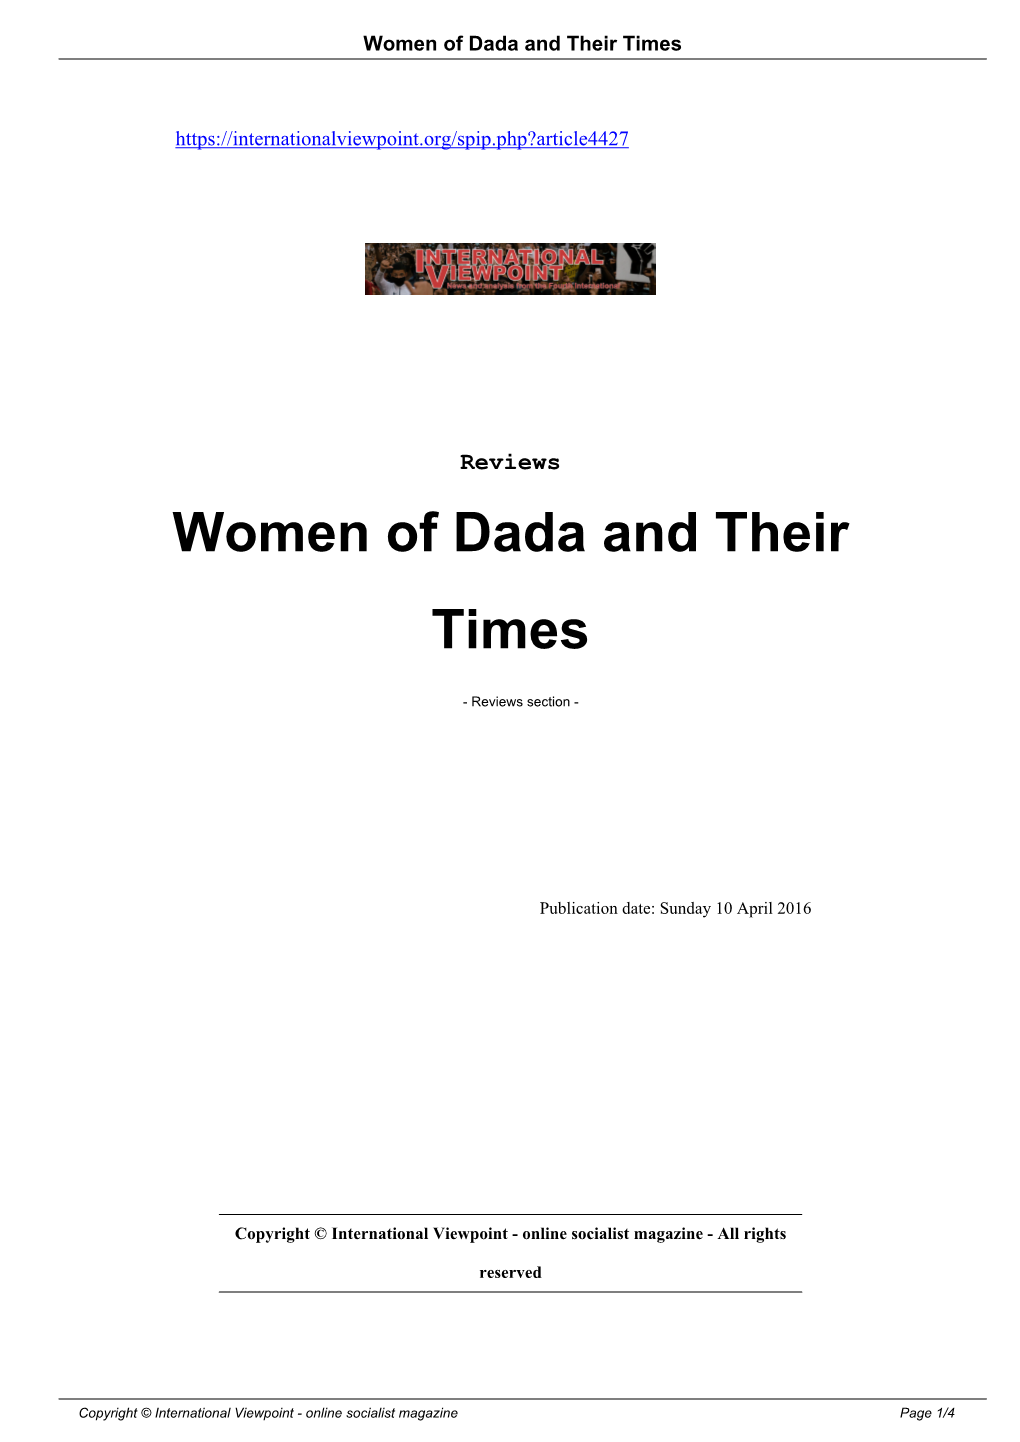 Women of Dada and Their Times